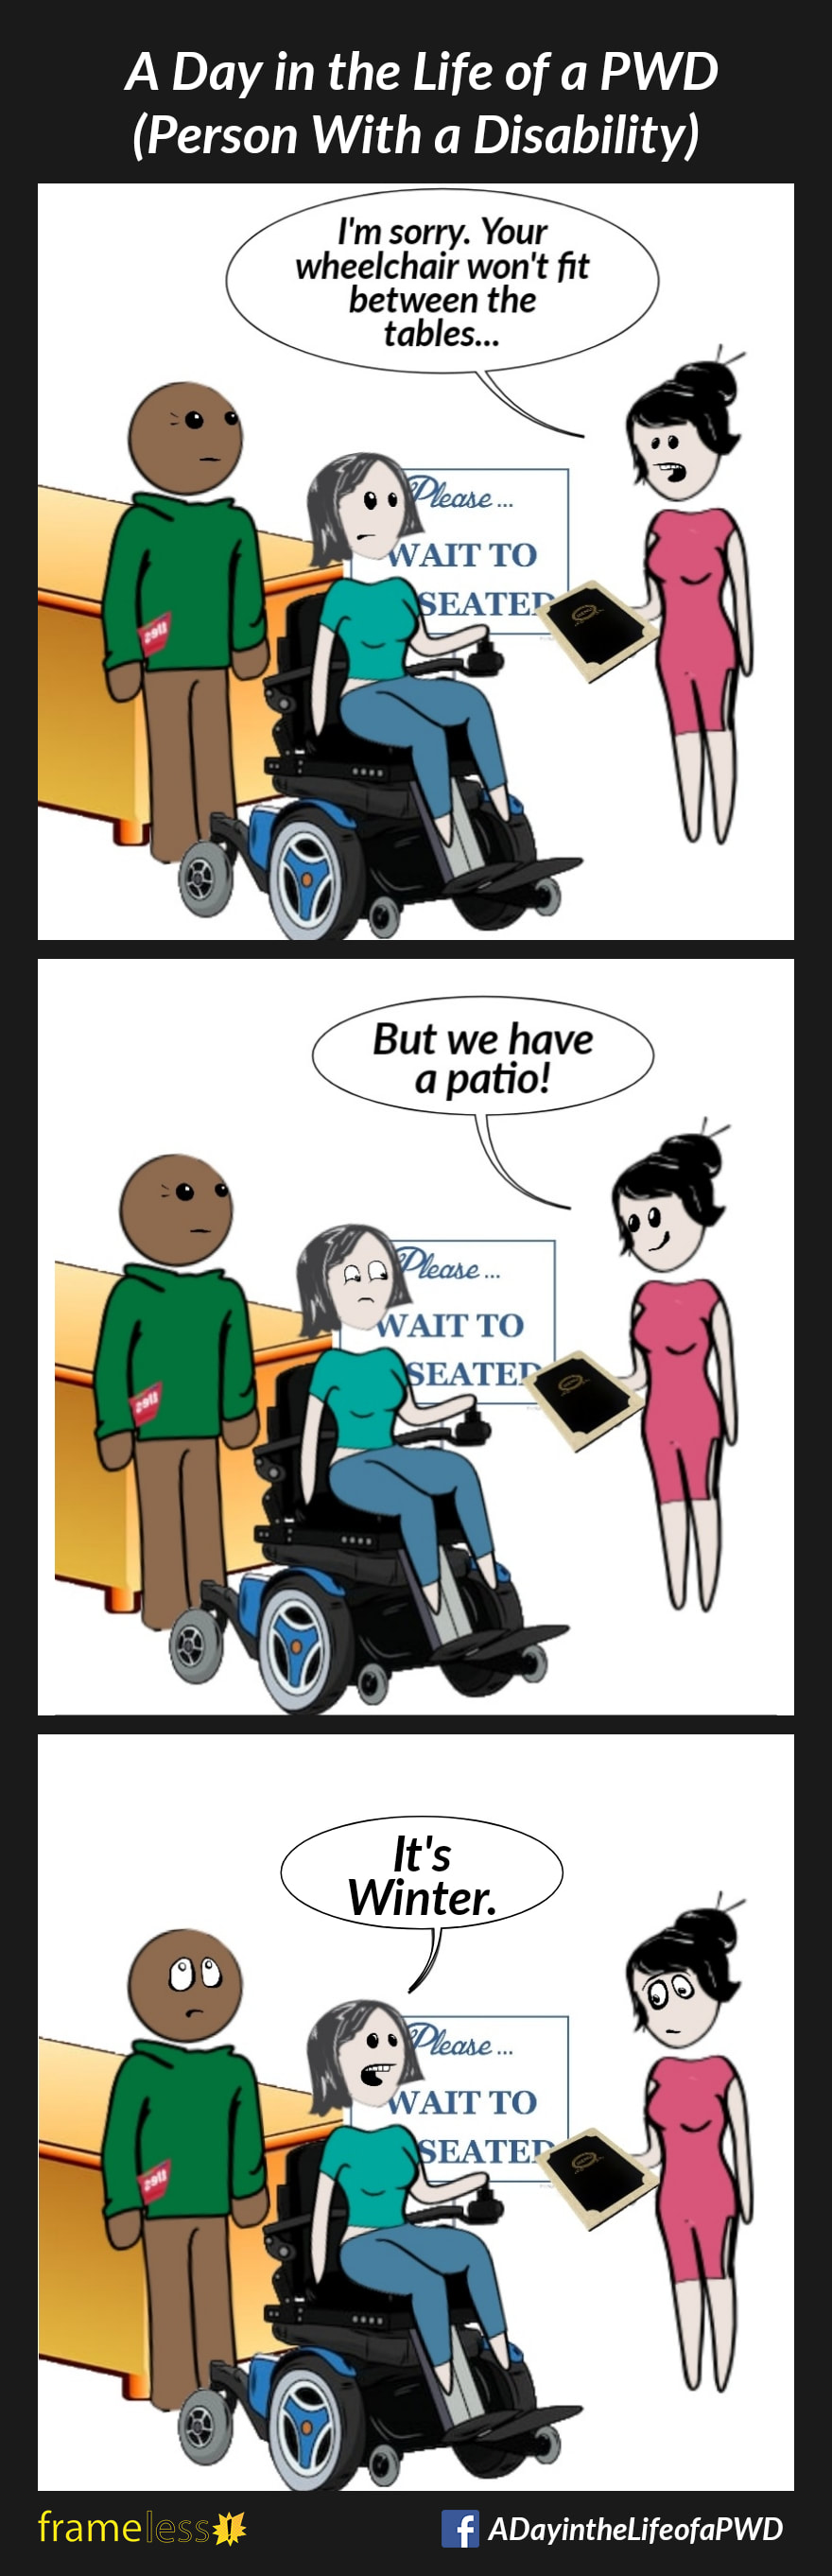 COMIC STRIP 
A Day in the Life of a PWD (Person With a Disability) 

Frame 1:
A woman in a power wheelchair and her husband are waiting to be seated at a restaurant. 
HOSTESS: I'm sorry. Your wheelchair won't fit between the tables... 

Frame 2:
HOSTESS (smiling): But we have a patio! 

Frame 3:
WOMAN: It's Winter. 